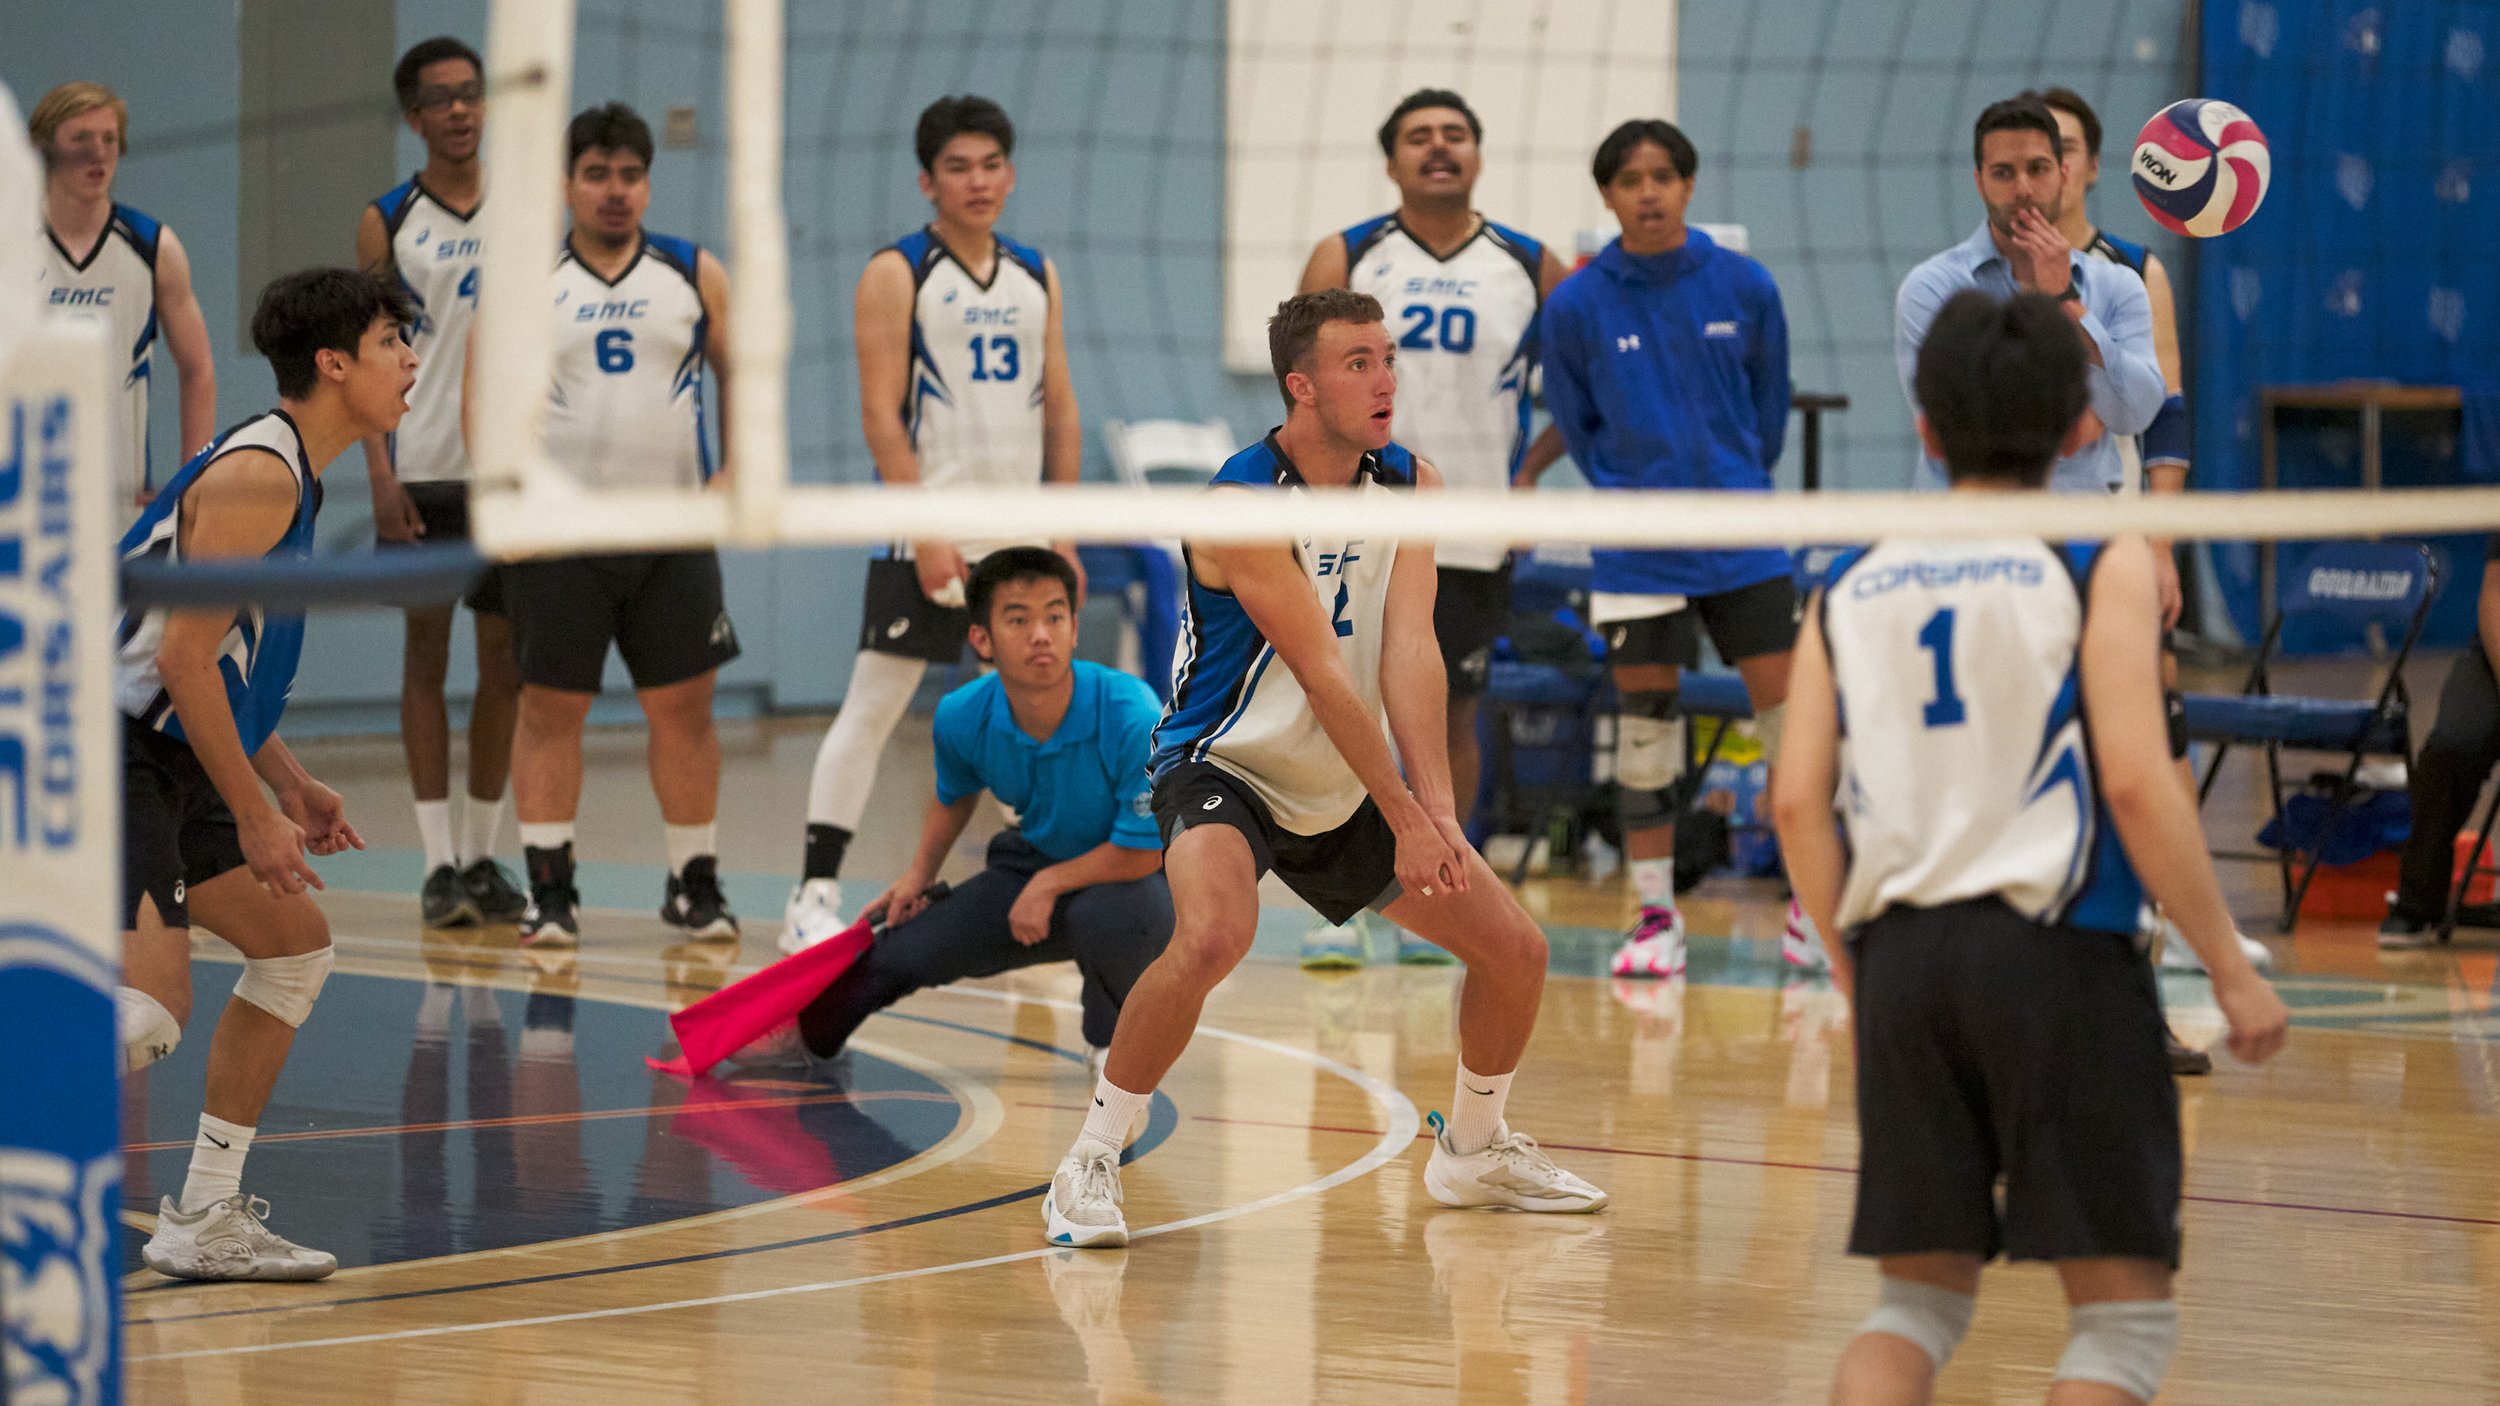  Santa Monica College Corsairs' Kane Schwengel (center) receives a serve during the men's volleyball match against the Moorpark College Raiders on Wednesday, April 12, 2023, at Corsair Gym in Santa Monica, Calif. The Corsairs lost 3-0. (Nicholas McCa